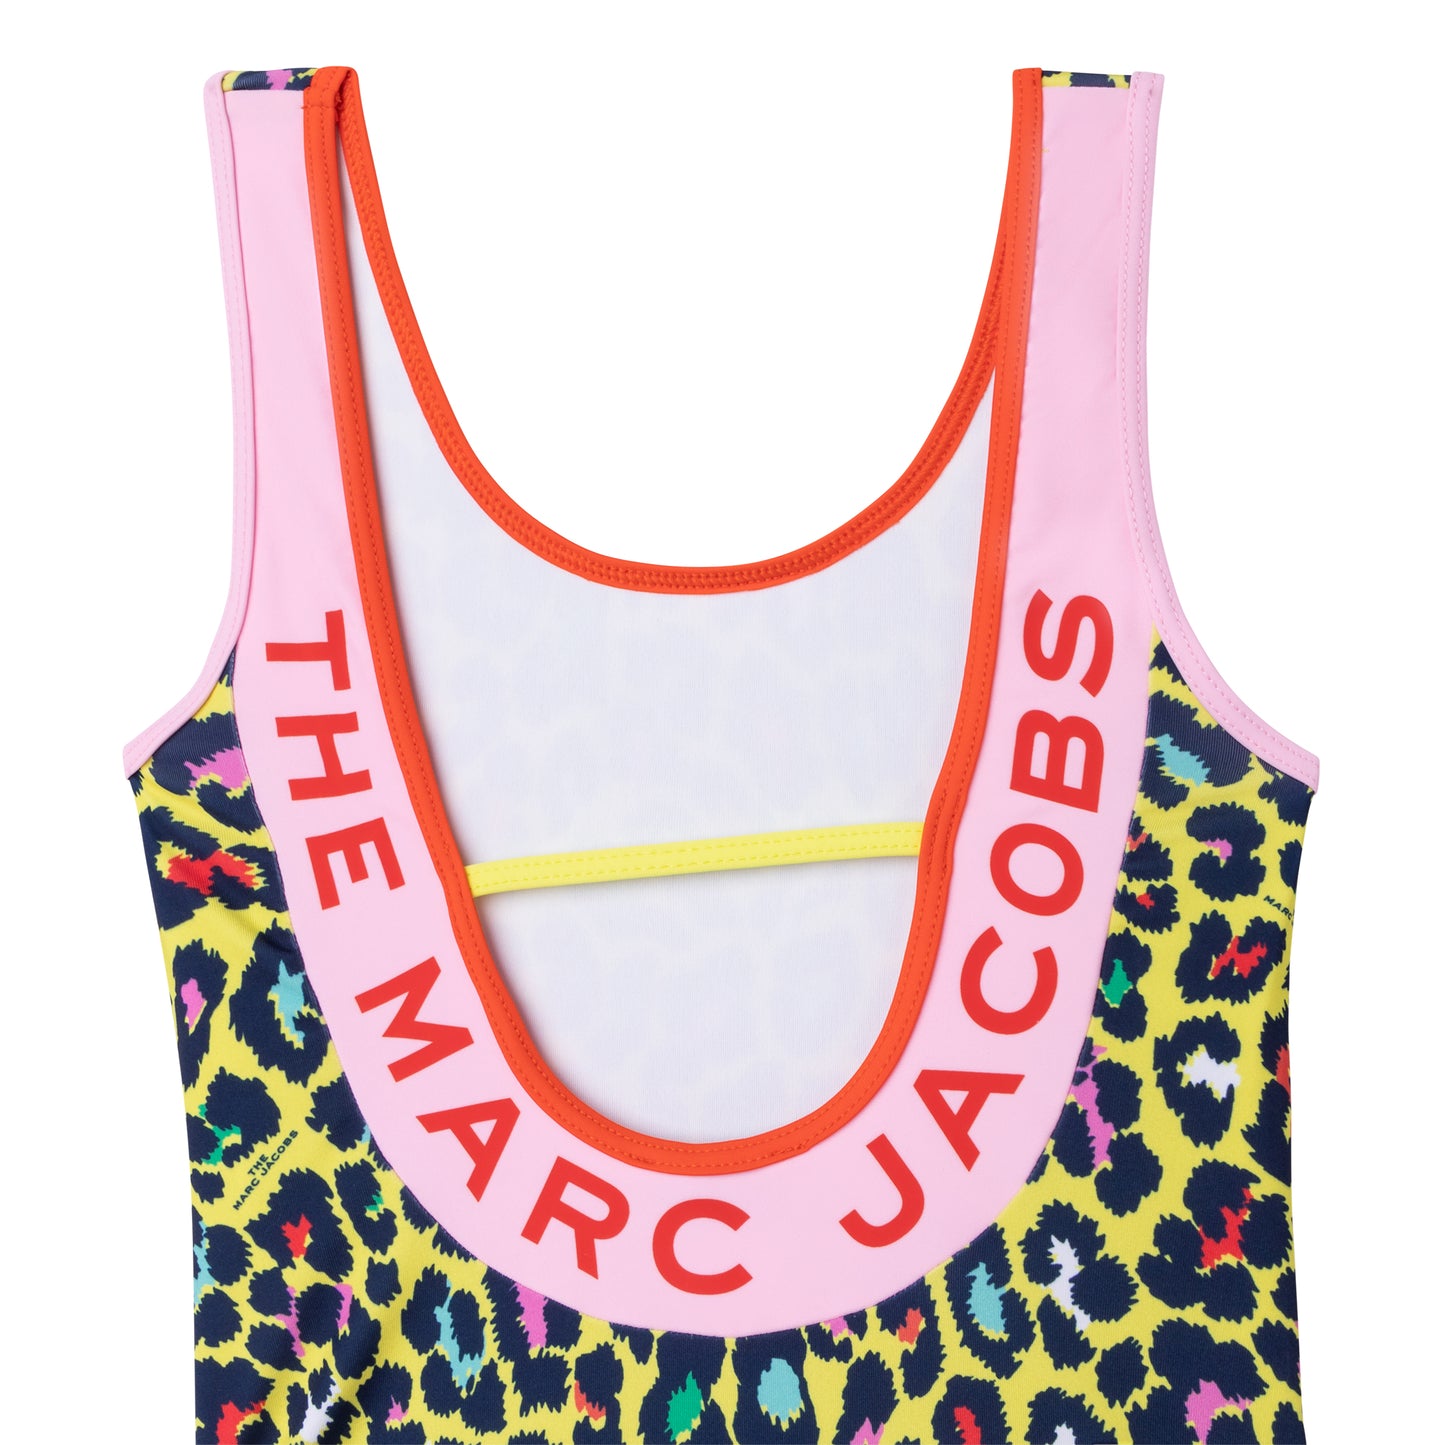 The Marc Jacobs Cheetah Swimsuit